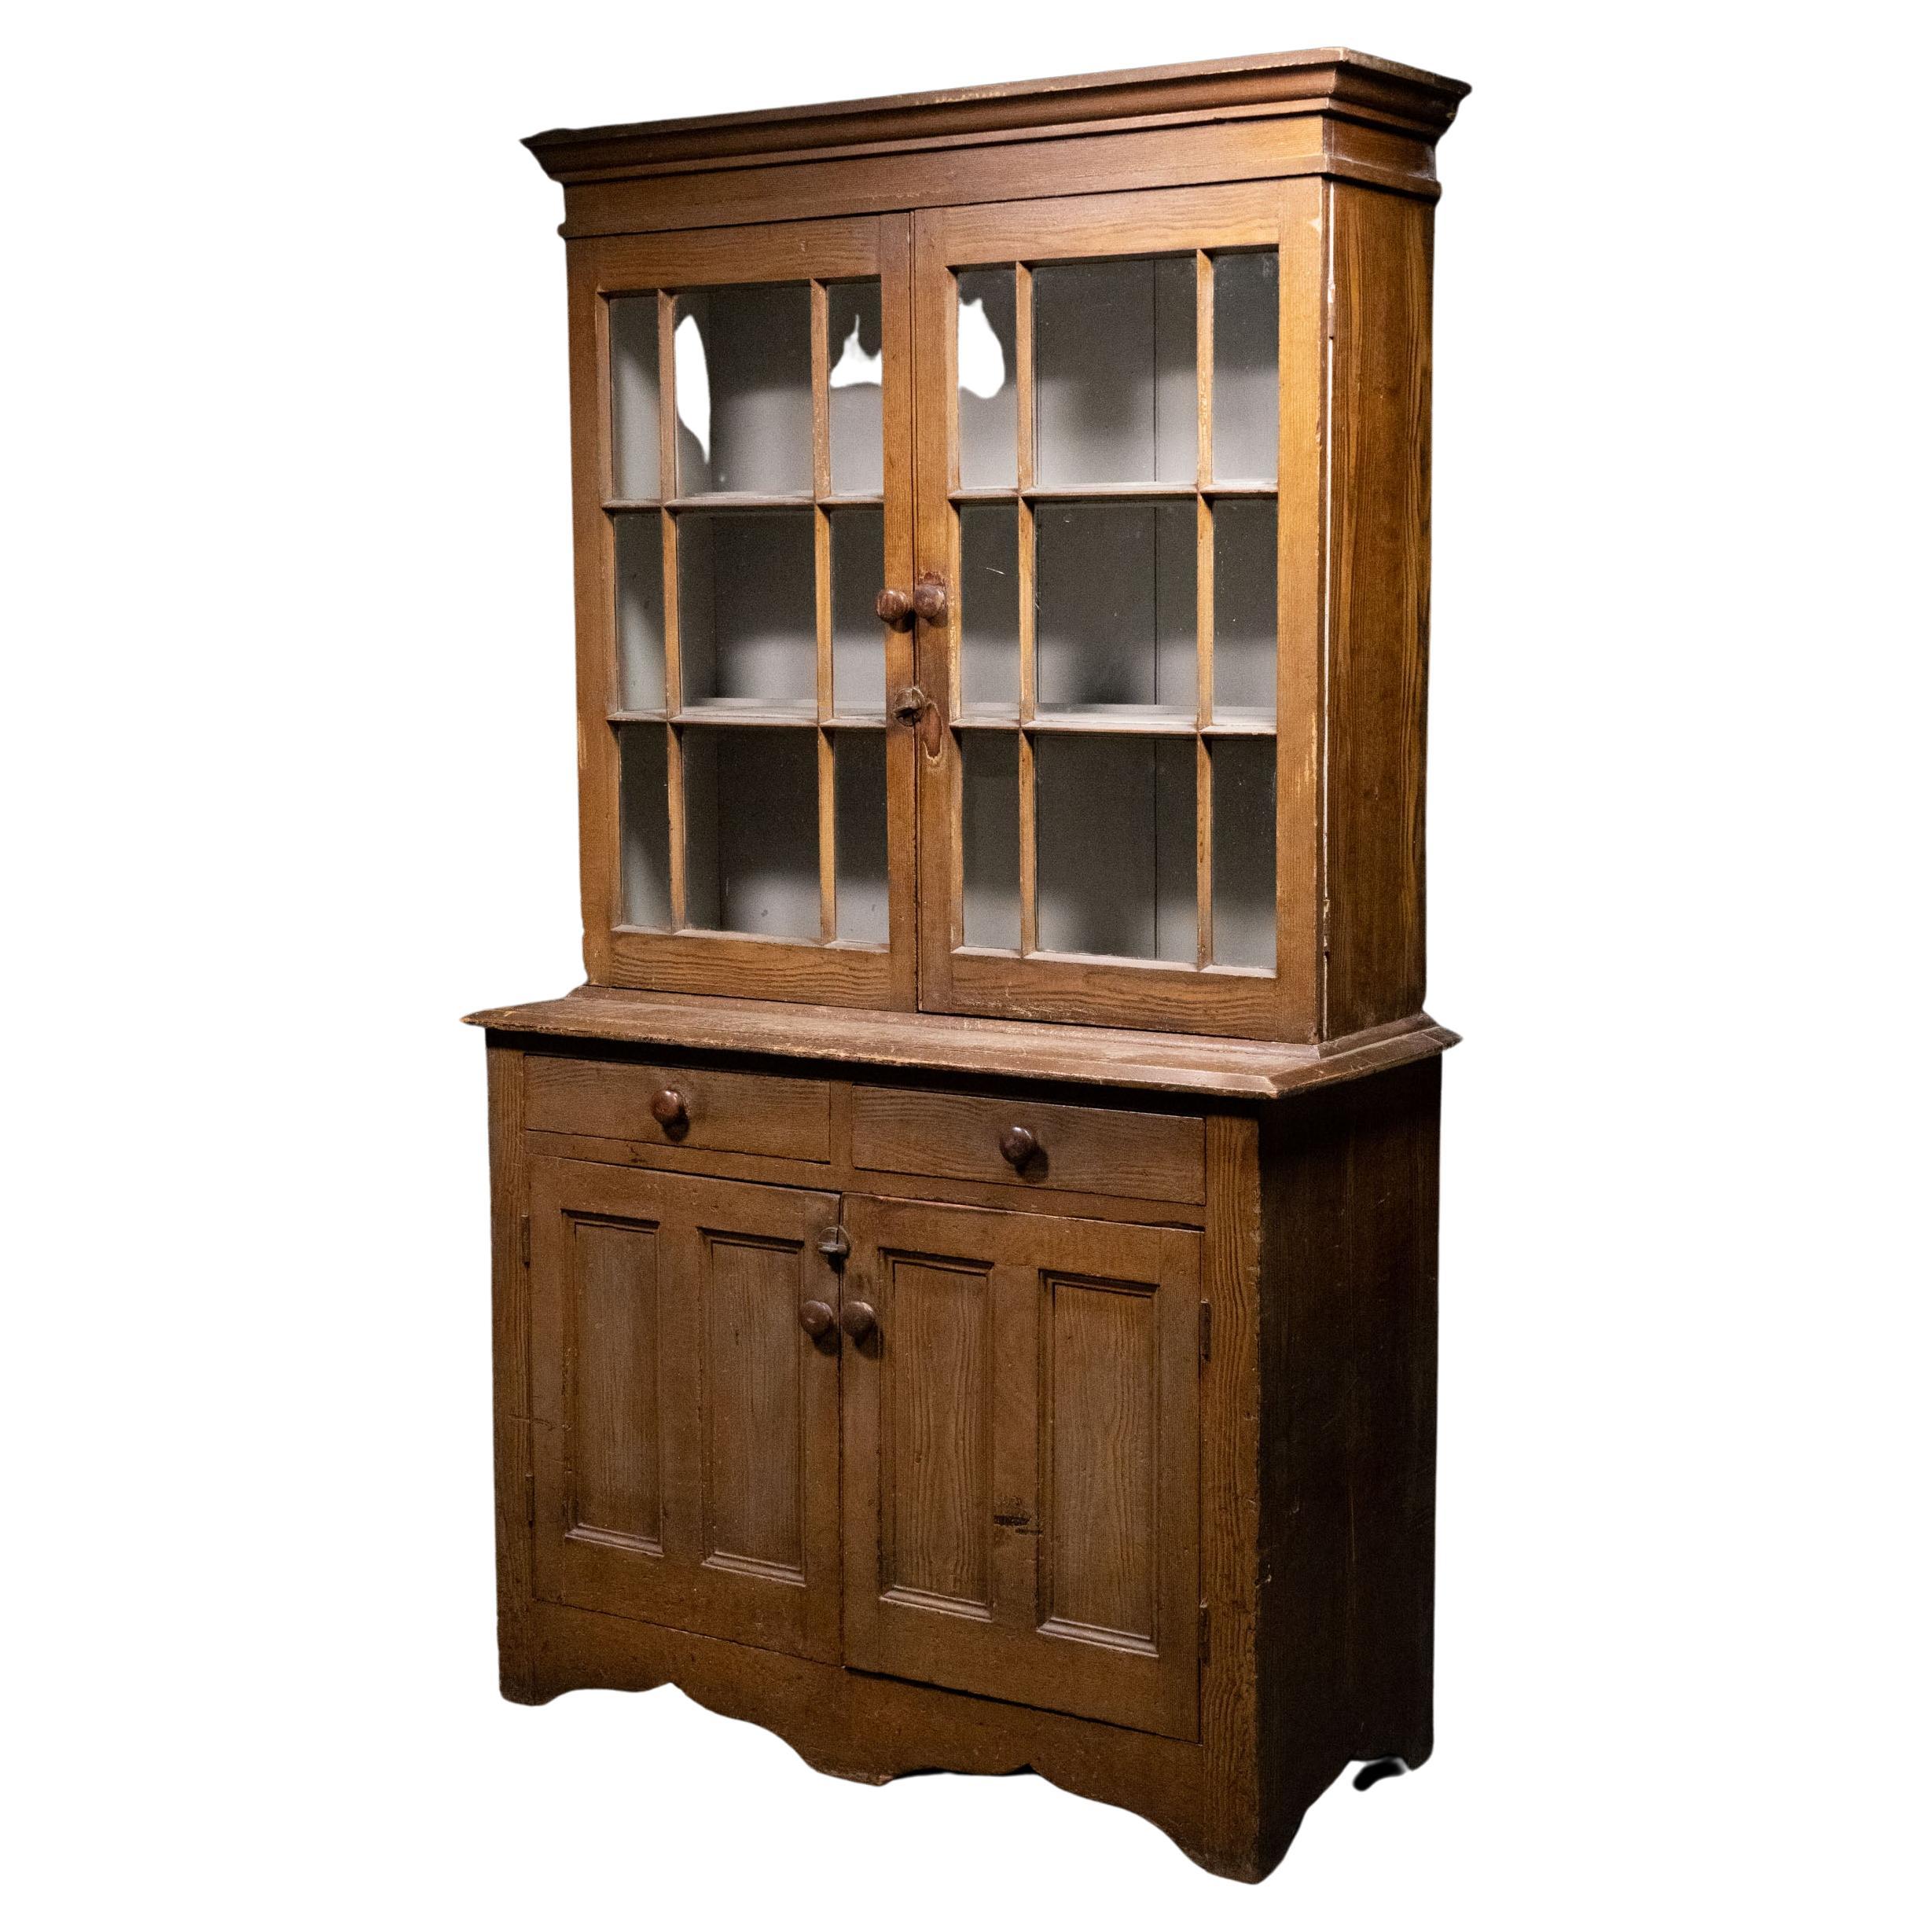 19th Century Pine Step Back Glass Door Country Cabinet